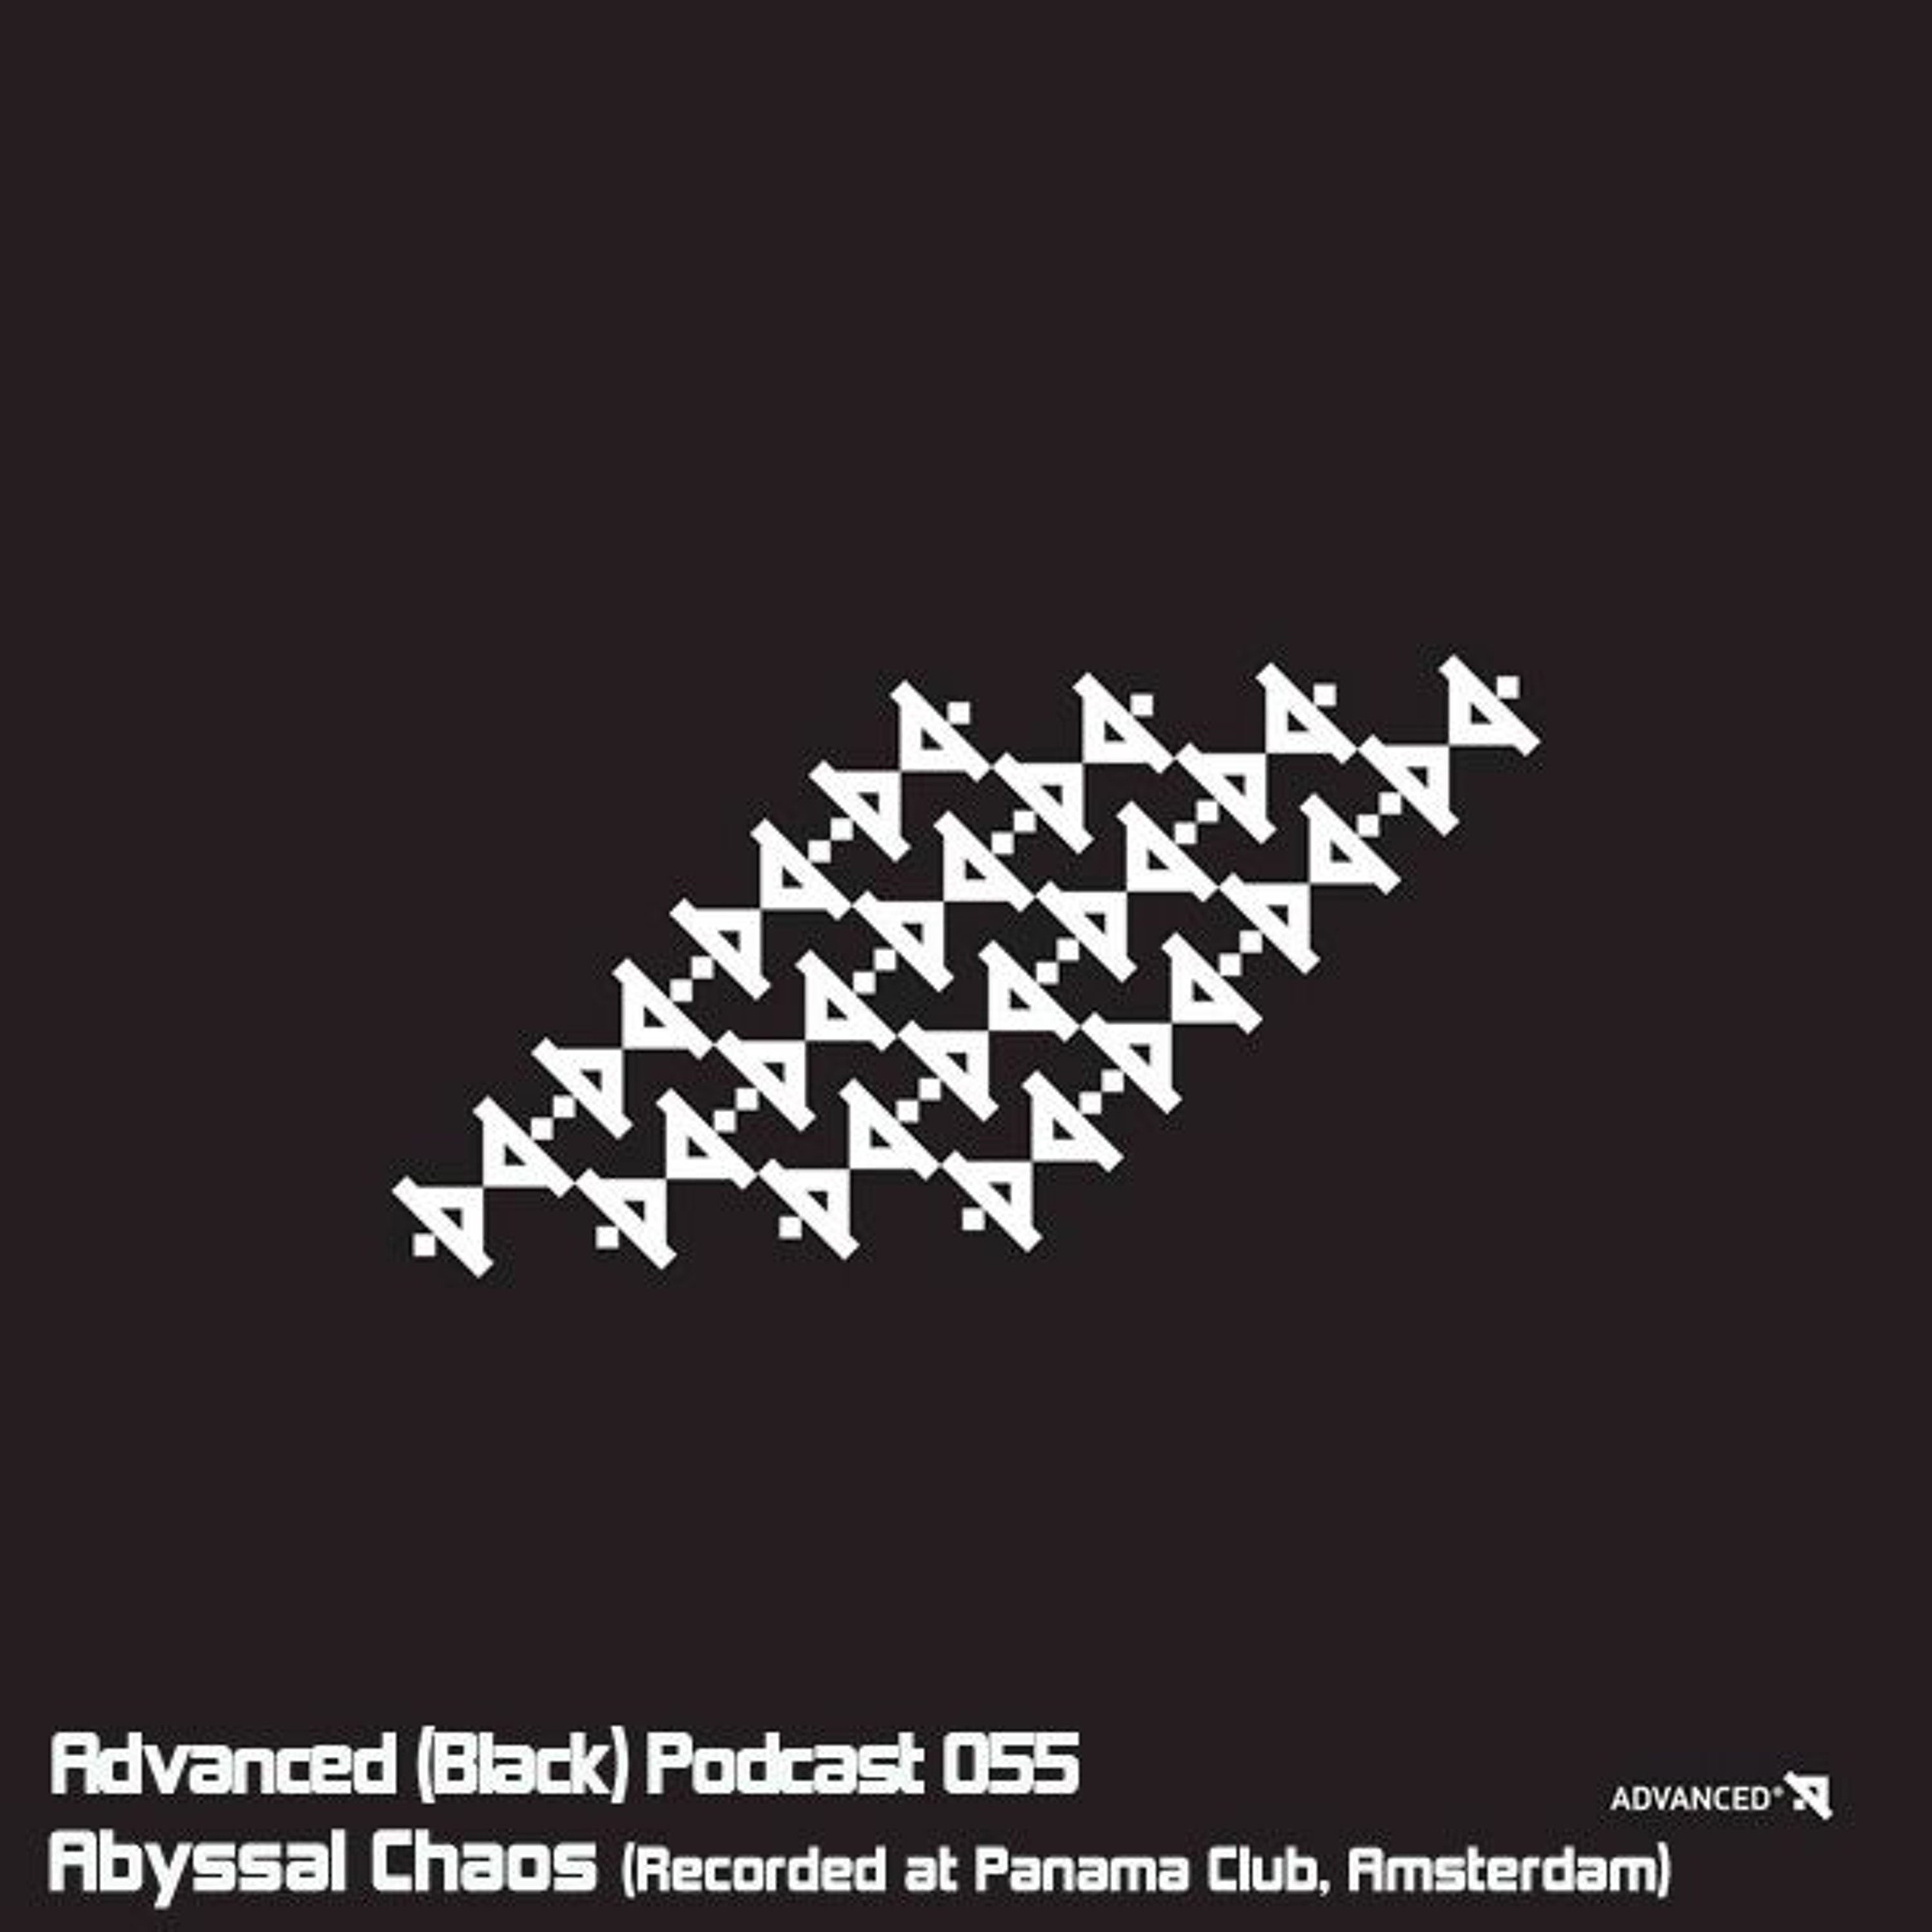 Advanced (Black) Podcast 055 with Abyssal Chaos (Recorded at Panama Club, Amsterdam)